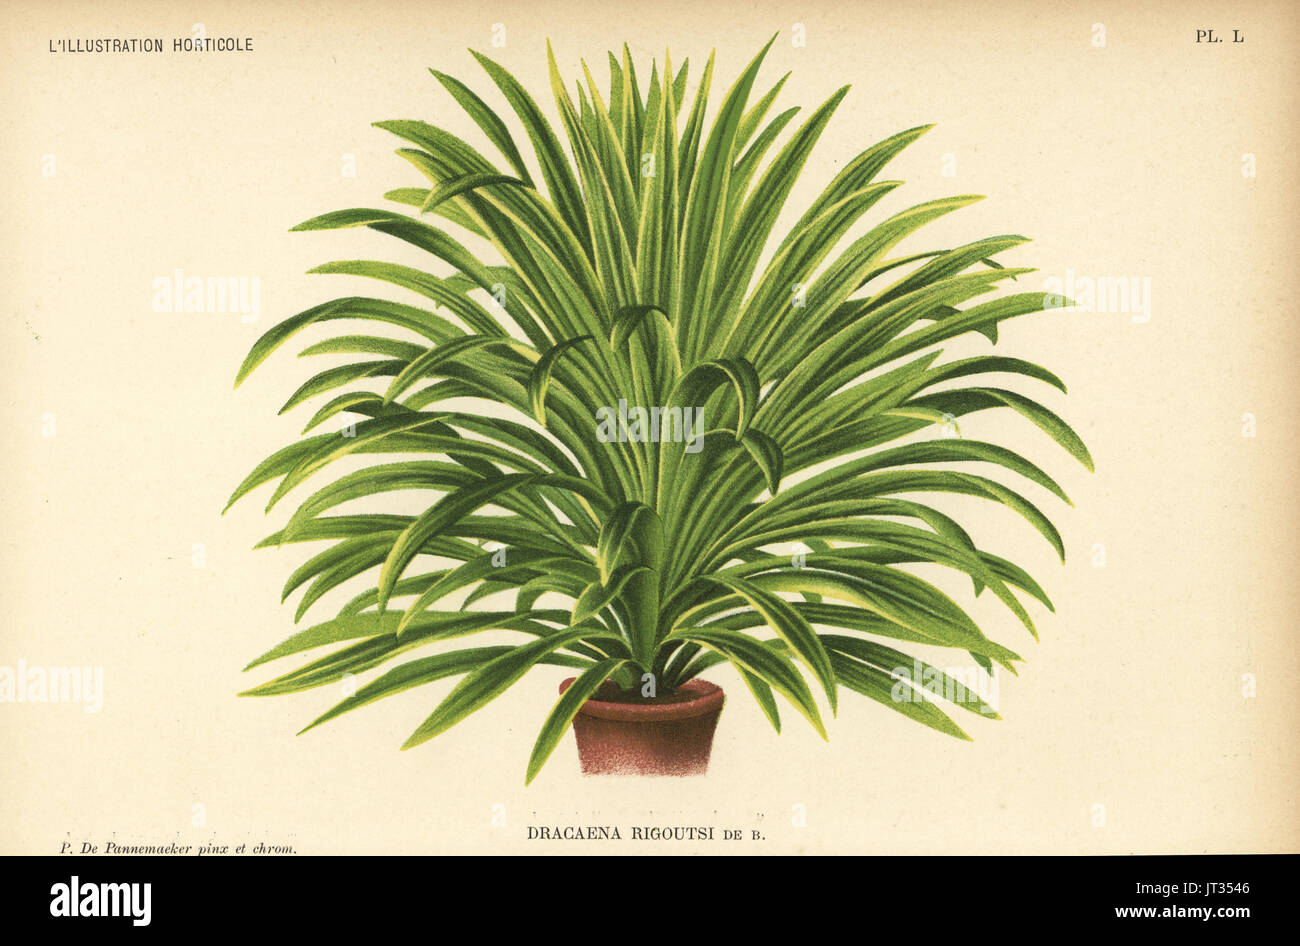 Cordyline australis hybrid produced by Albert Rigouts, Dracaena rigoutsi. Drawn and chromolithographed by Pieter de Pannemaeker from Jean Linden's l'Illustration Horticole, Brussels, 1896. Stock Photo